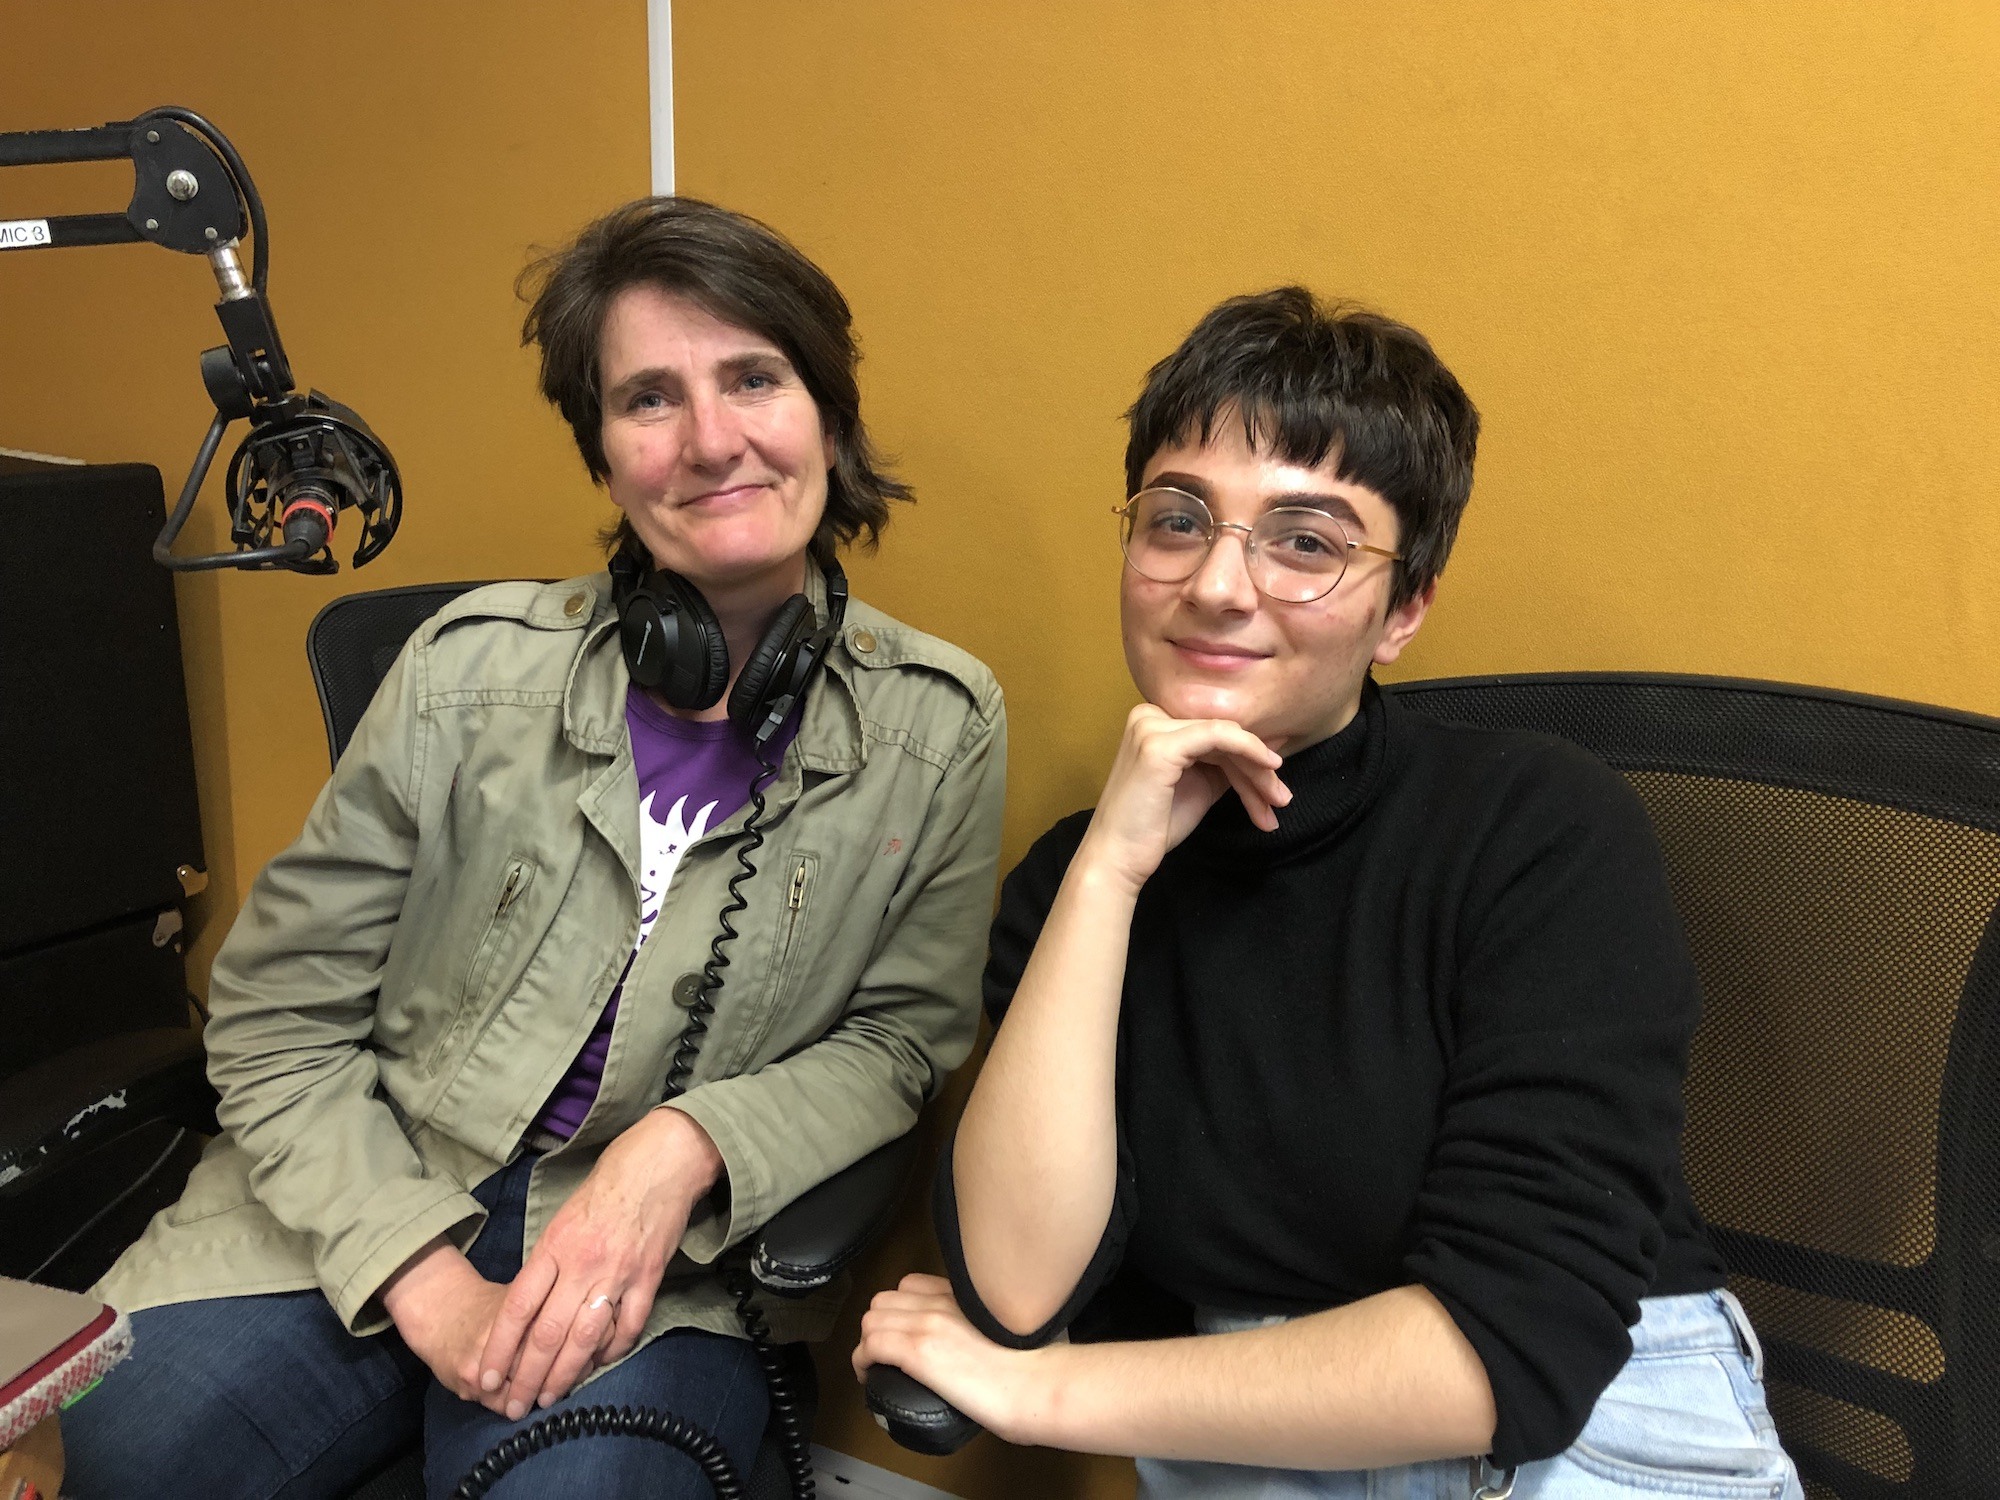 Jane Trowell and Rosamund Zipporah sit side by side in the Resonance FM studio